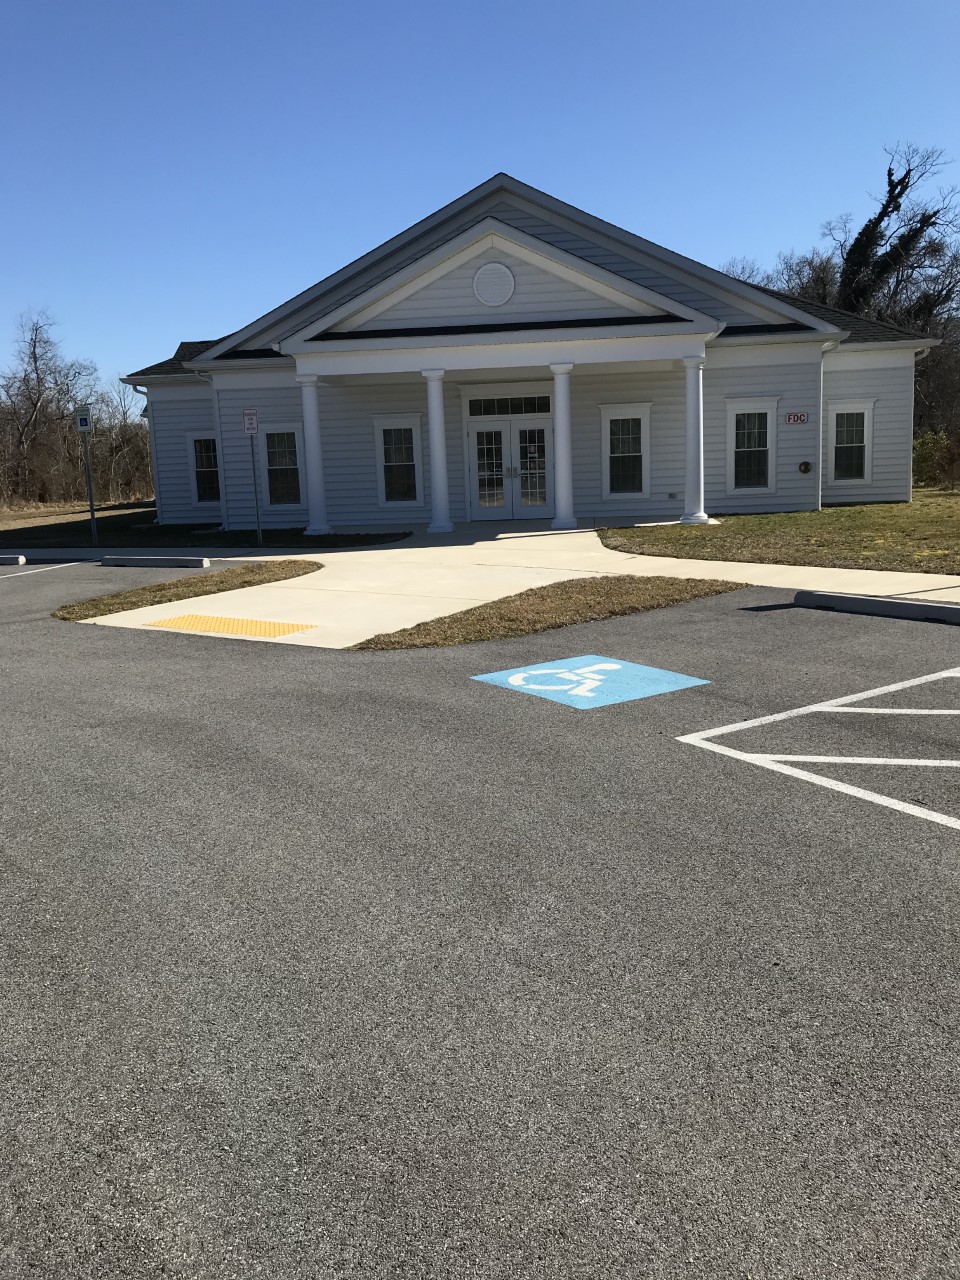 Parish Hall with 52 marked parking spaces For hall rental call the Parish Office